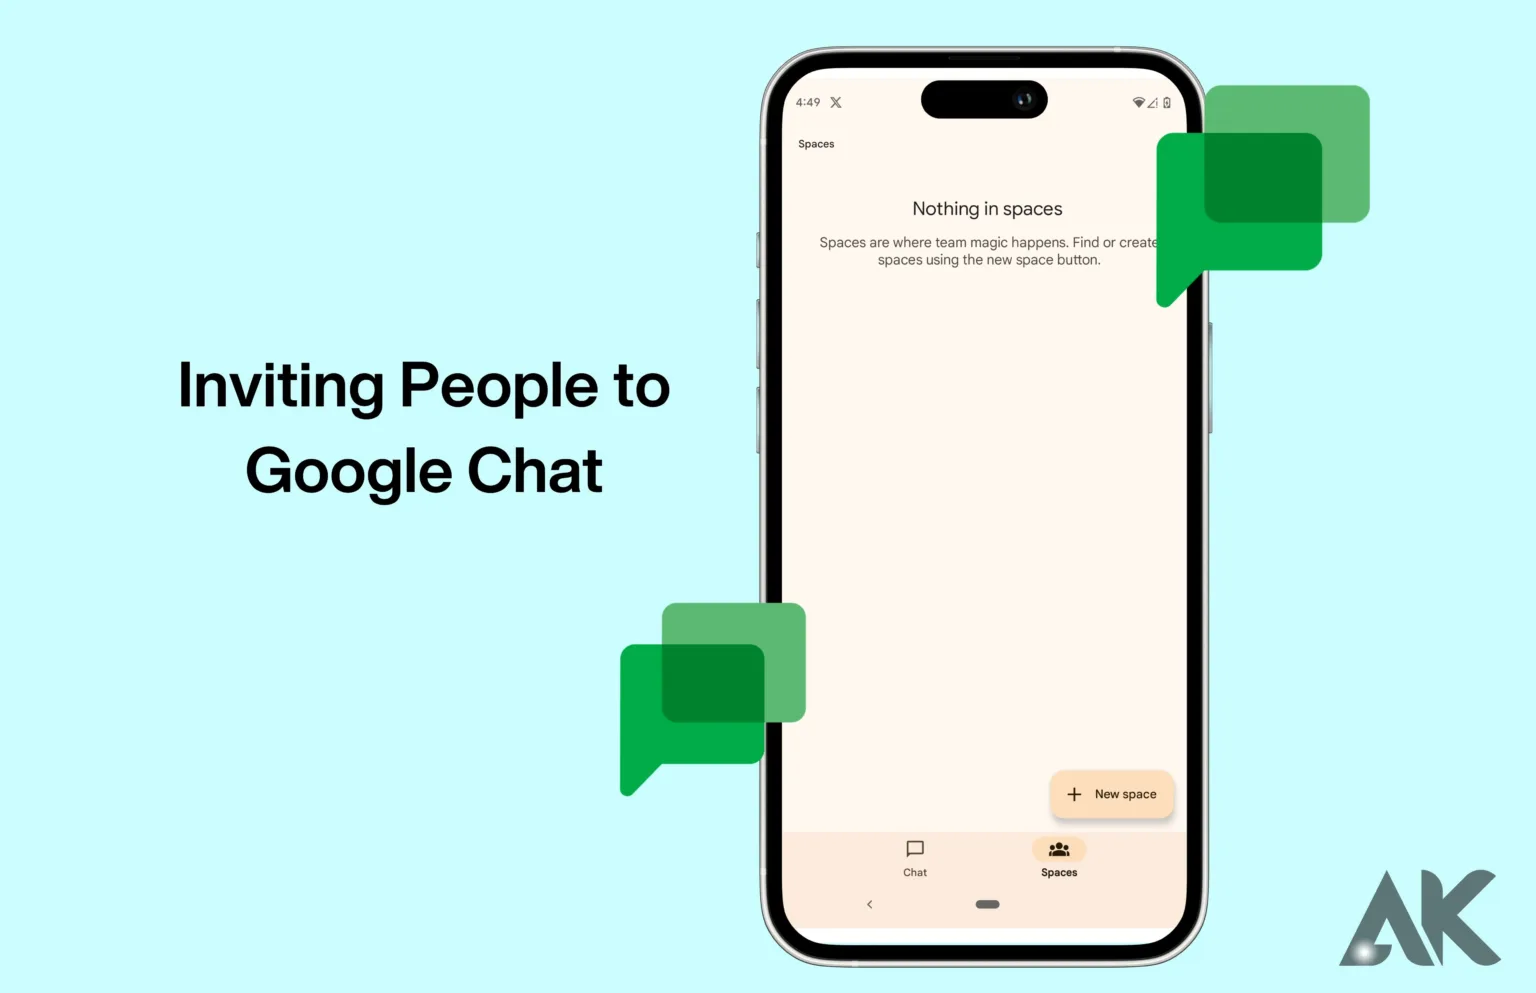 Inviting People to Google Chat: Bringing Your Team Together